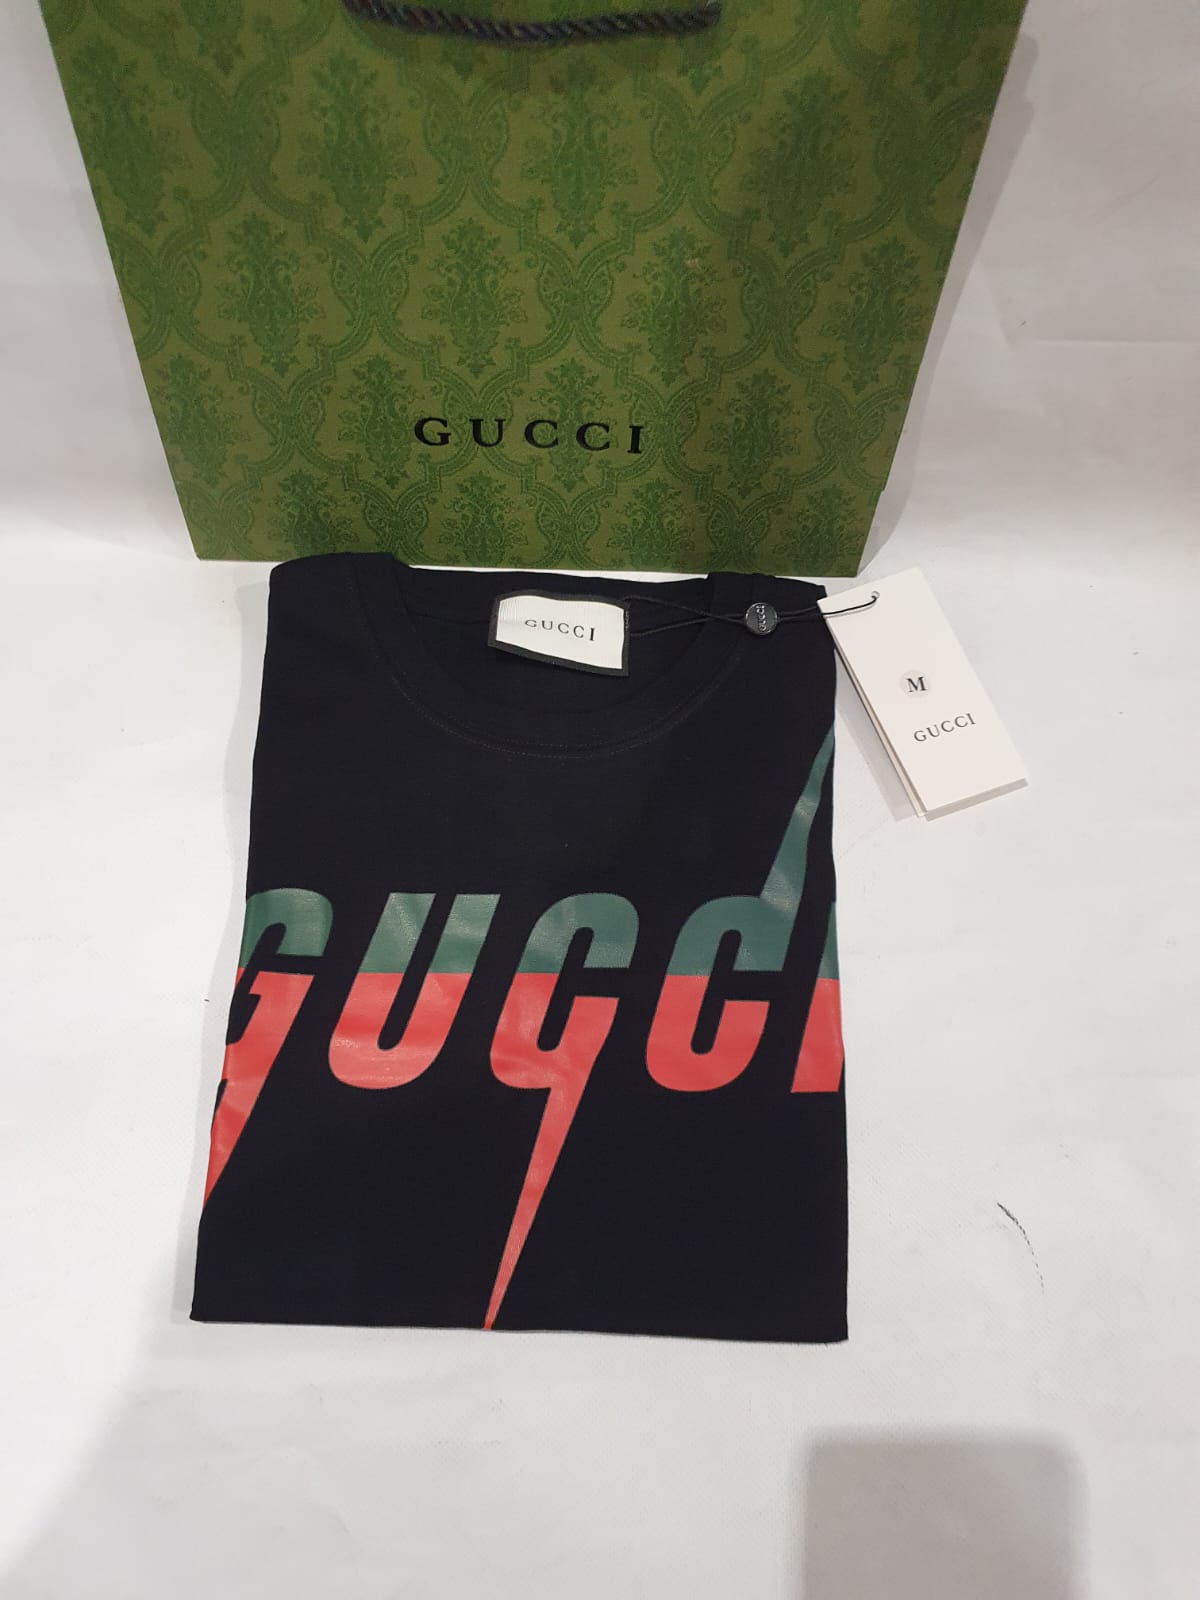 Gucci T-shirt with Blade print